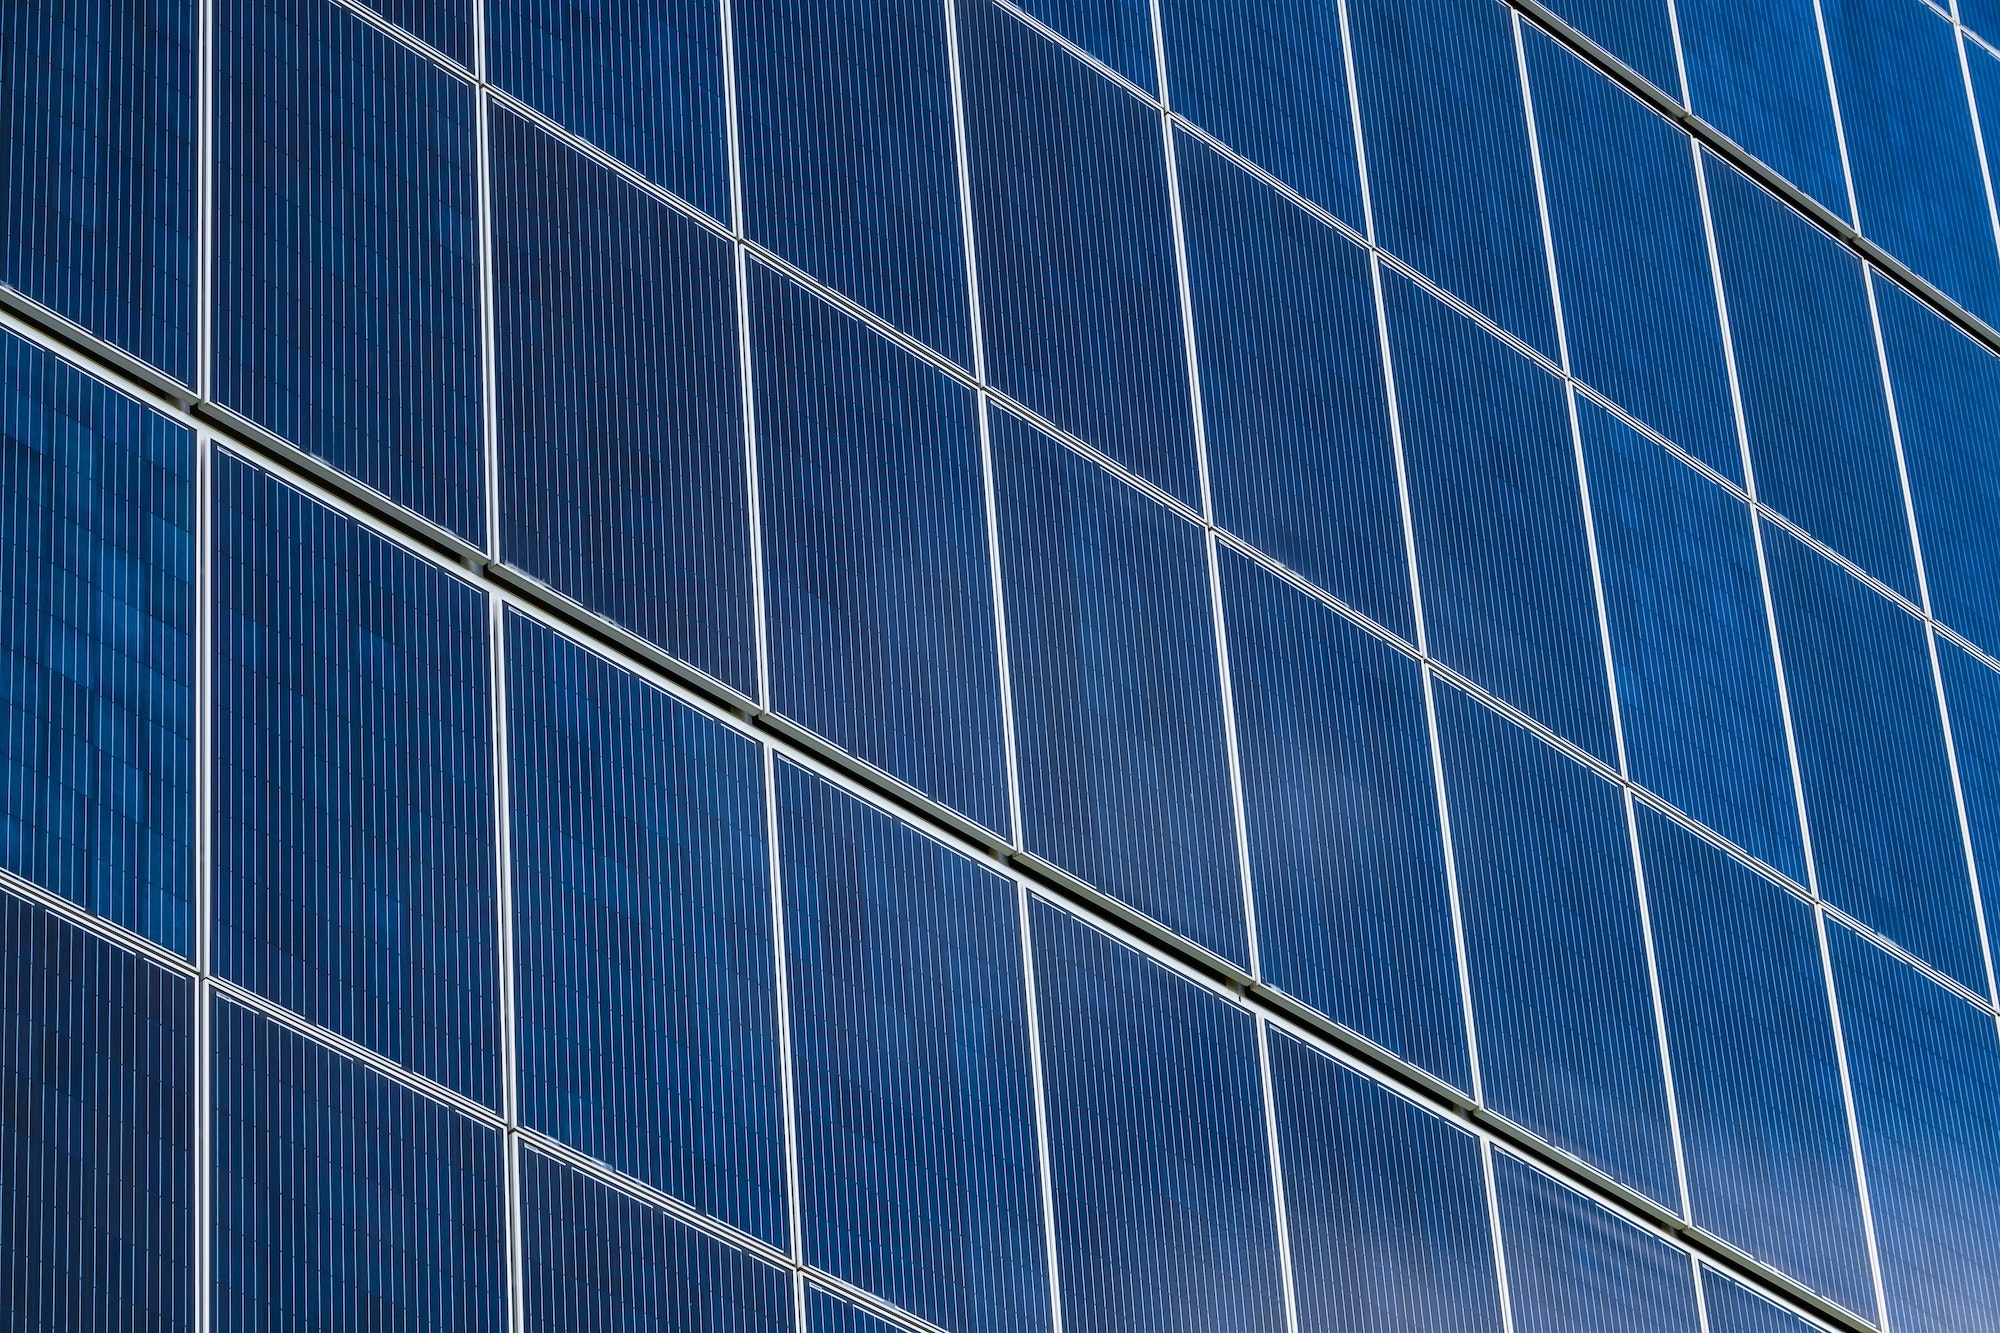 solar panels on the wall of a multi-storey building